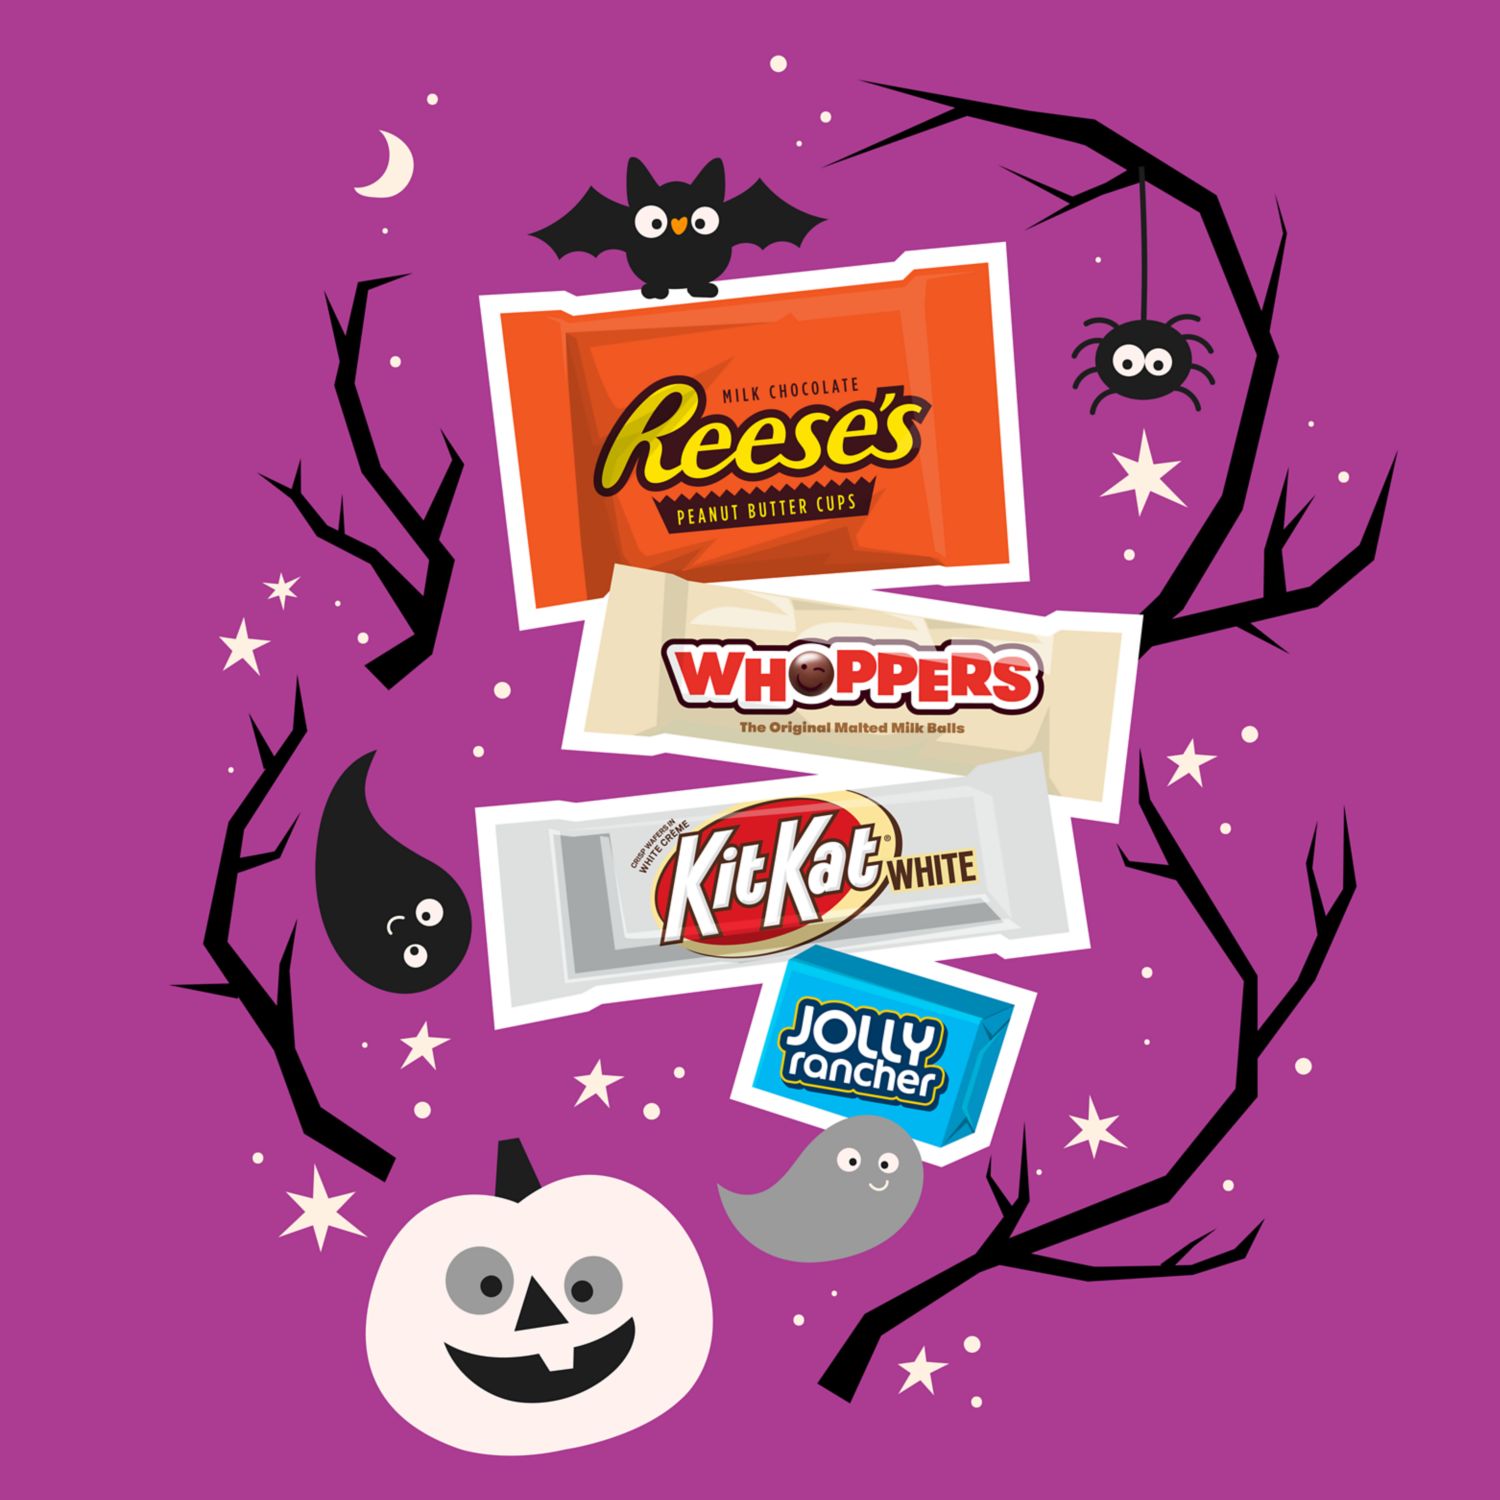 Hershey, Miniatures Halloween Assortment Chocolate, White Creme and Sweets Assortment Candy, Halloween, 37.4 oz, Plastic Pumpkin Candy Bowl (160 Pieces) - image 3 of 6